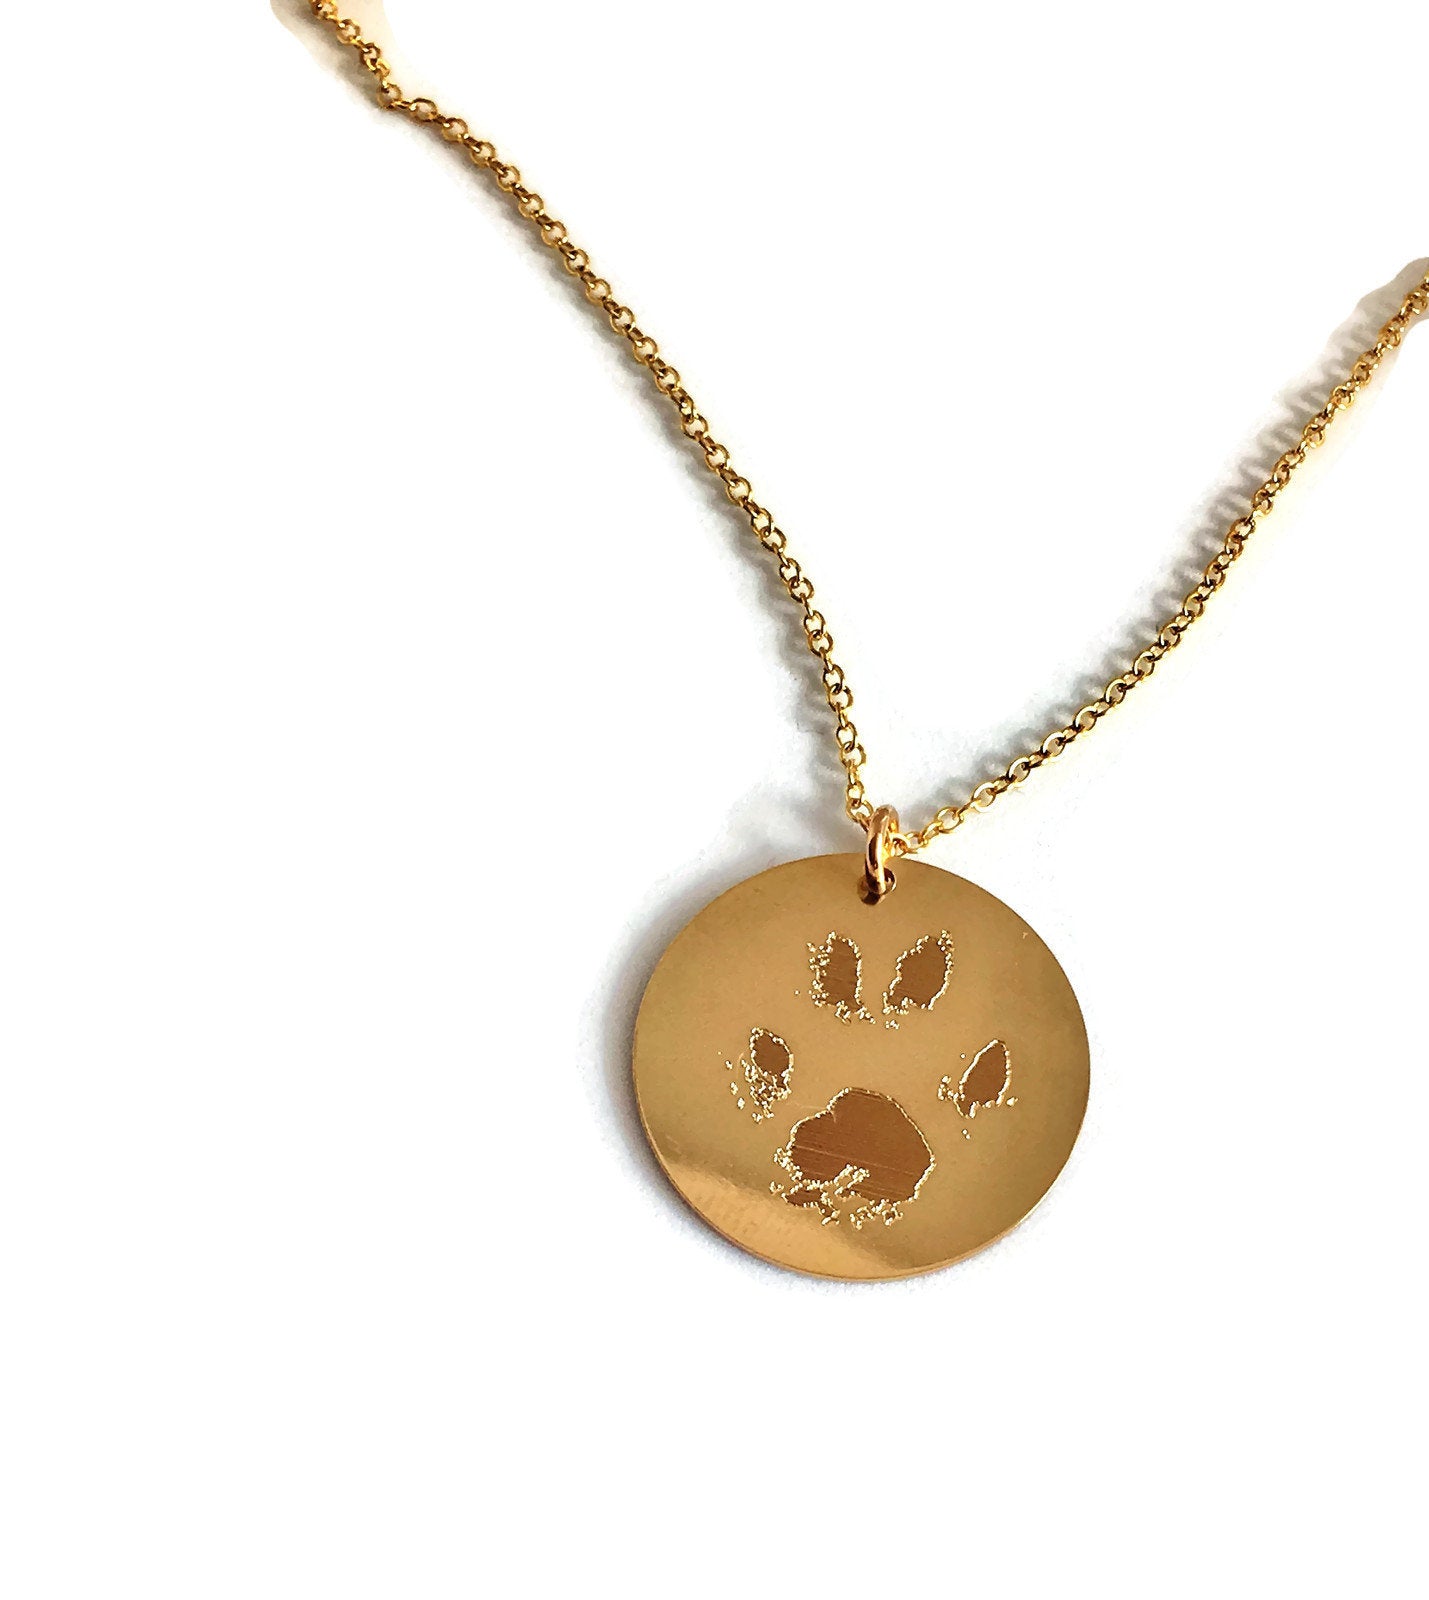 PWFE Gold Link Chain Necklace for Dogs - 27 cm - Tiny Bling for Small Dog  or Puppy - Lightweight Braided Metal Look - Cute Pet Jewelry and  Accessories - Walmart.com